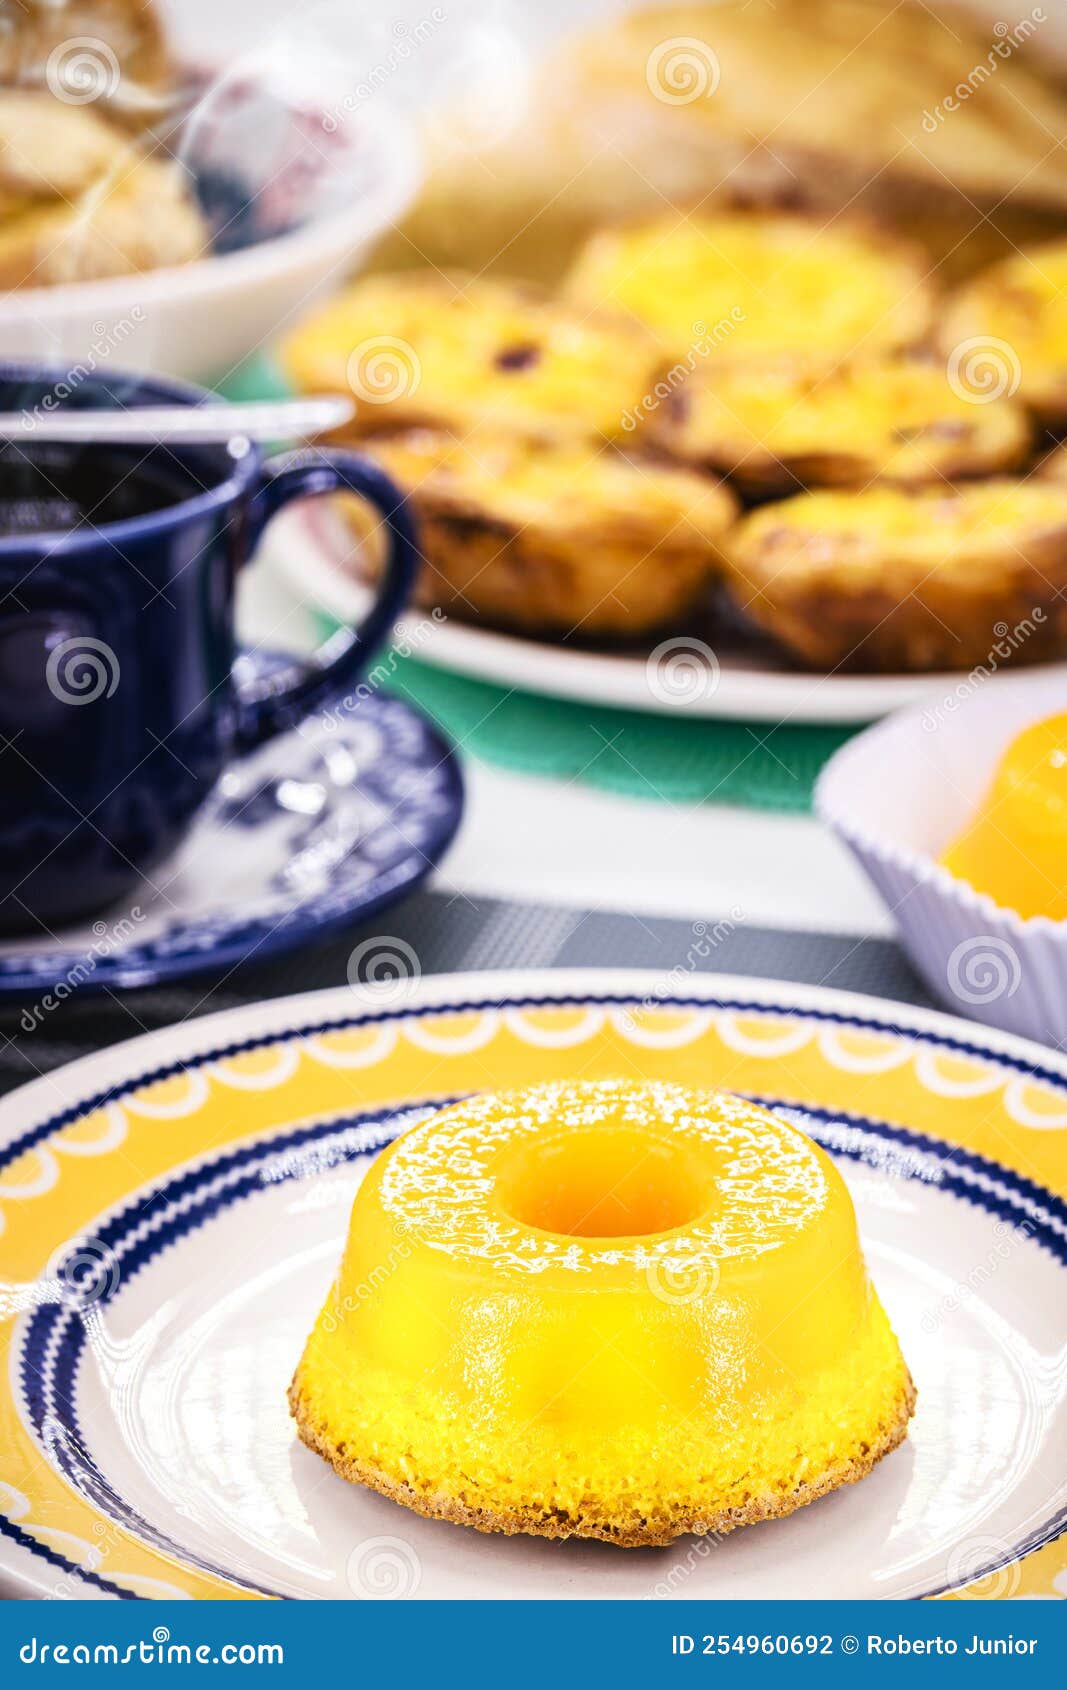 quindim or brisa do lis, typical sweet from brazil and portugal, made with egg yolks, almonds or grated coconut